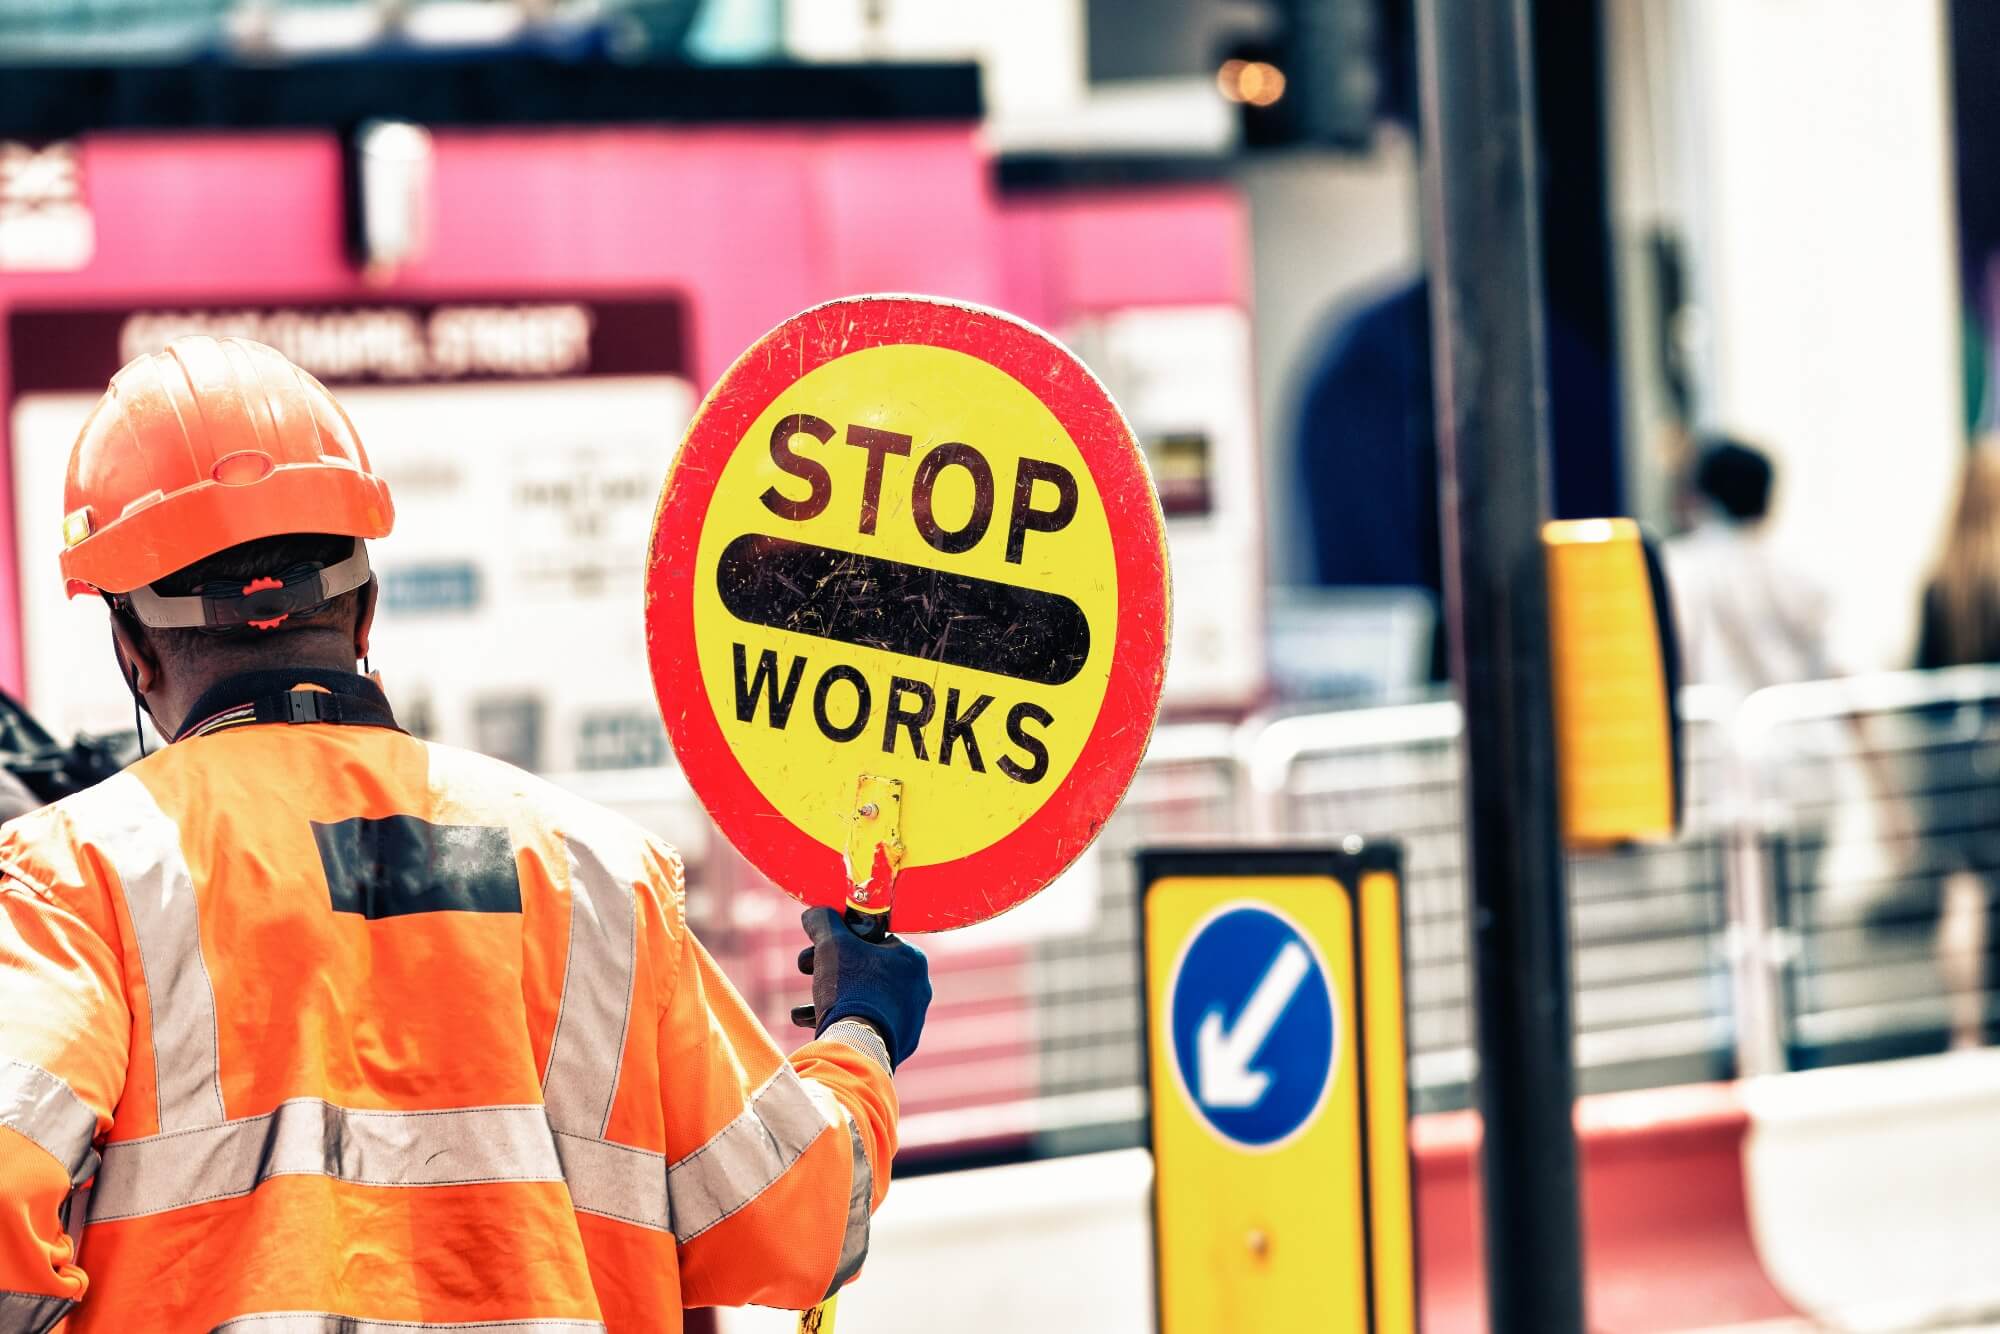 Roadworker holding a stop sign